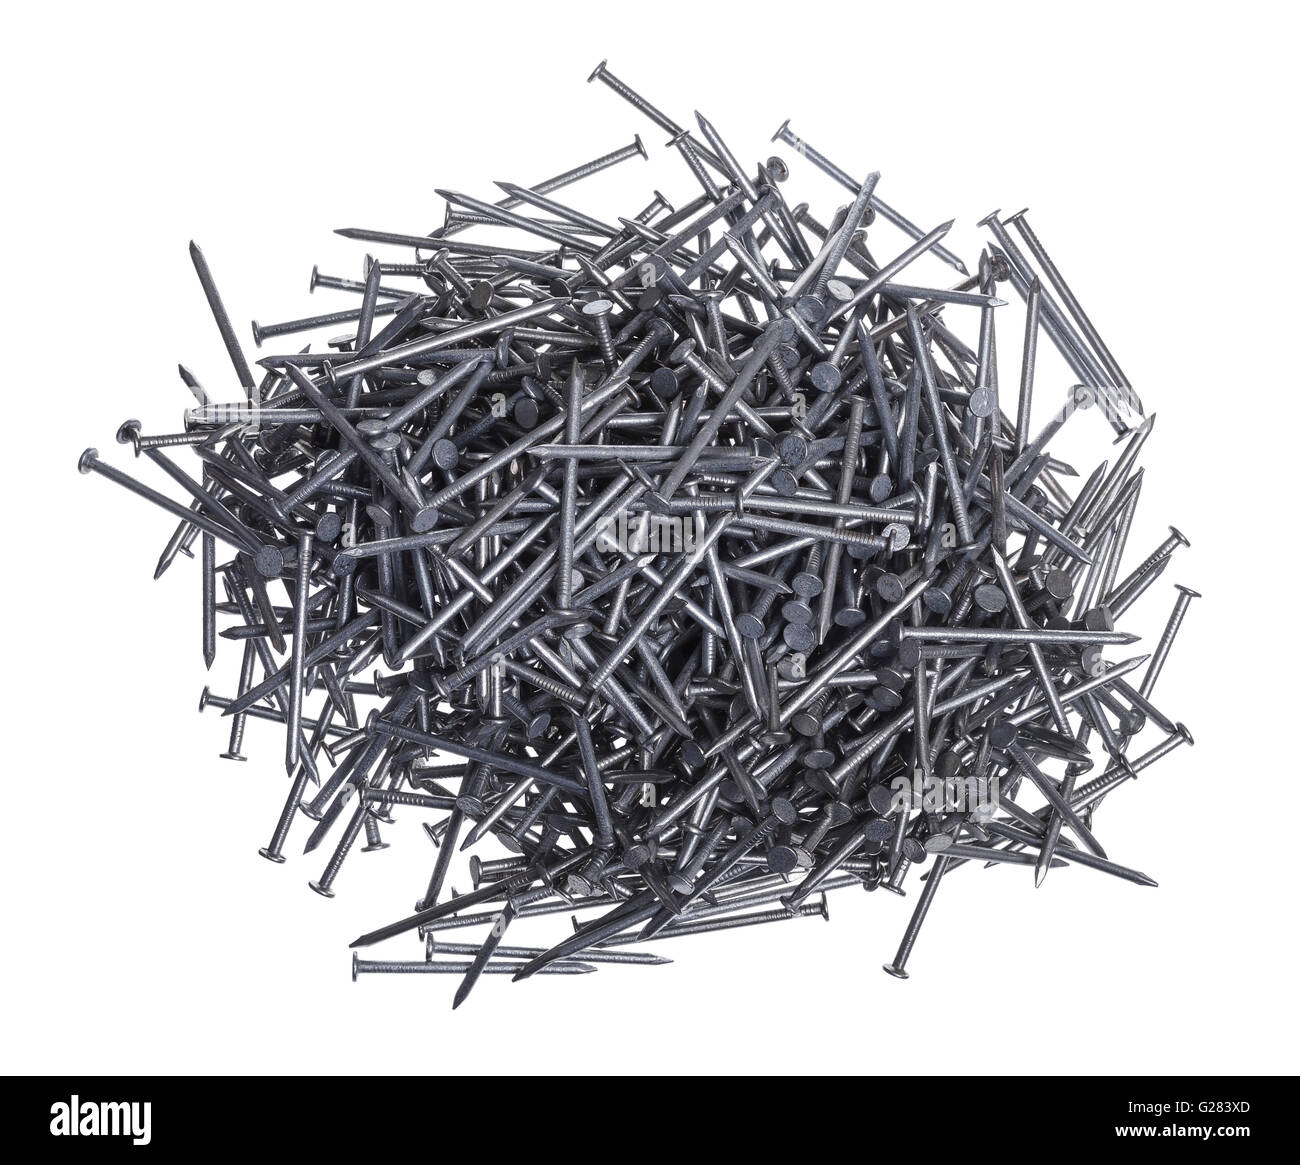 A pile of galvanized nails Stock Photo